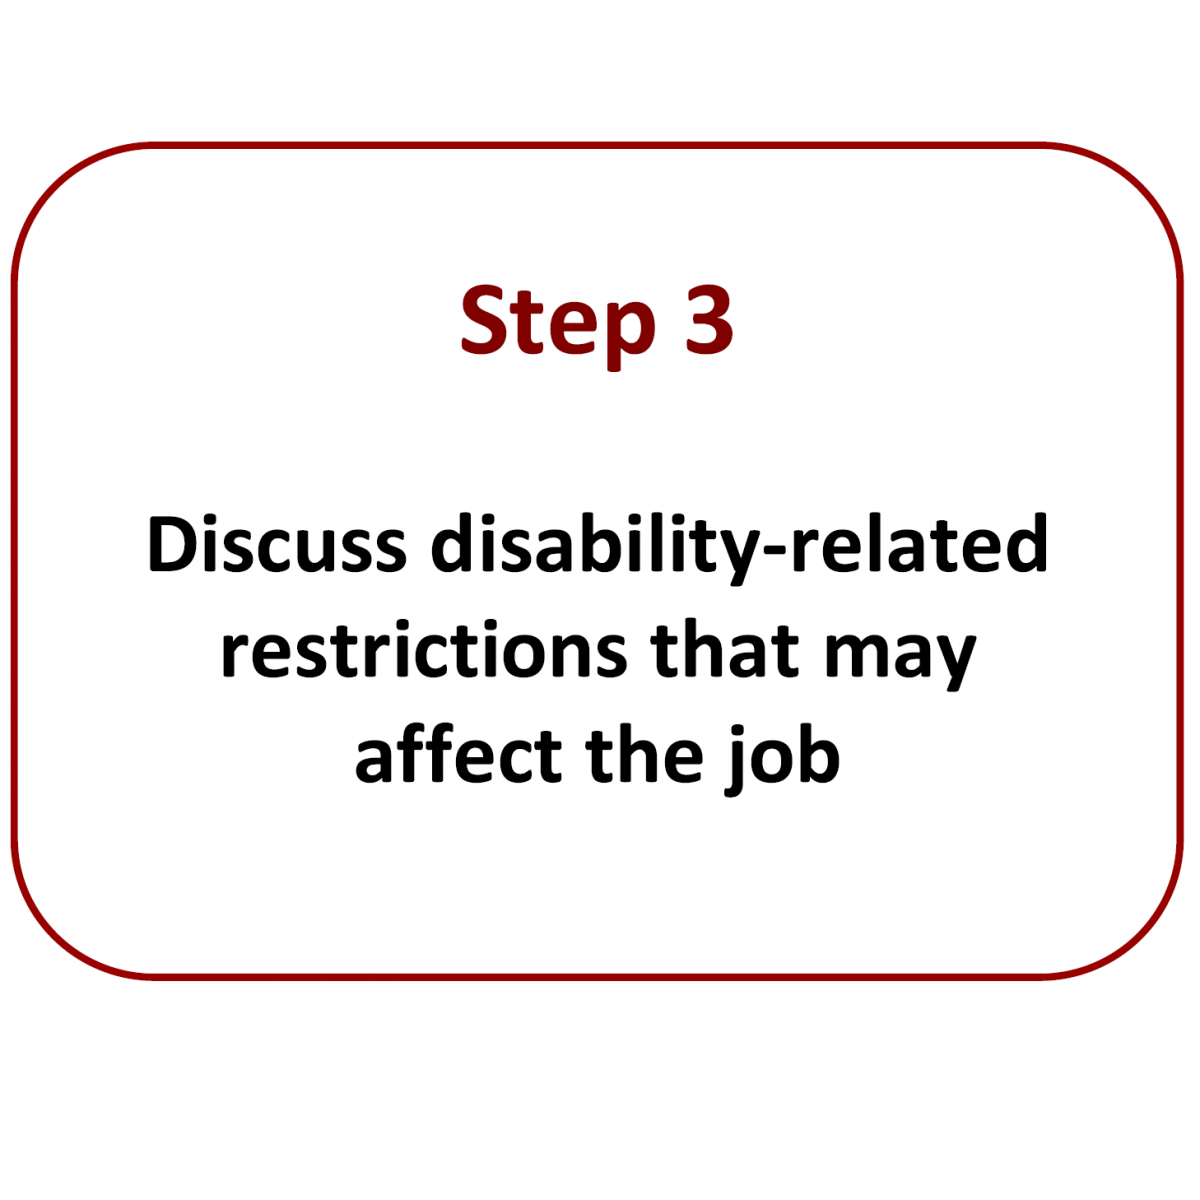 Step 3: Discuss disability-related restrictions that may affect the job